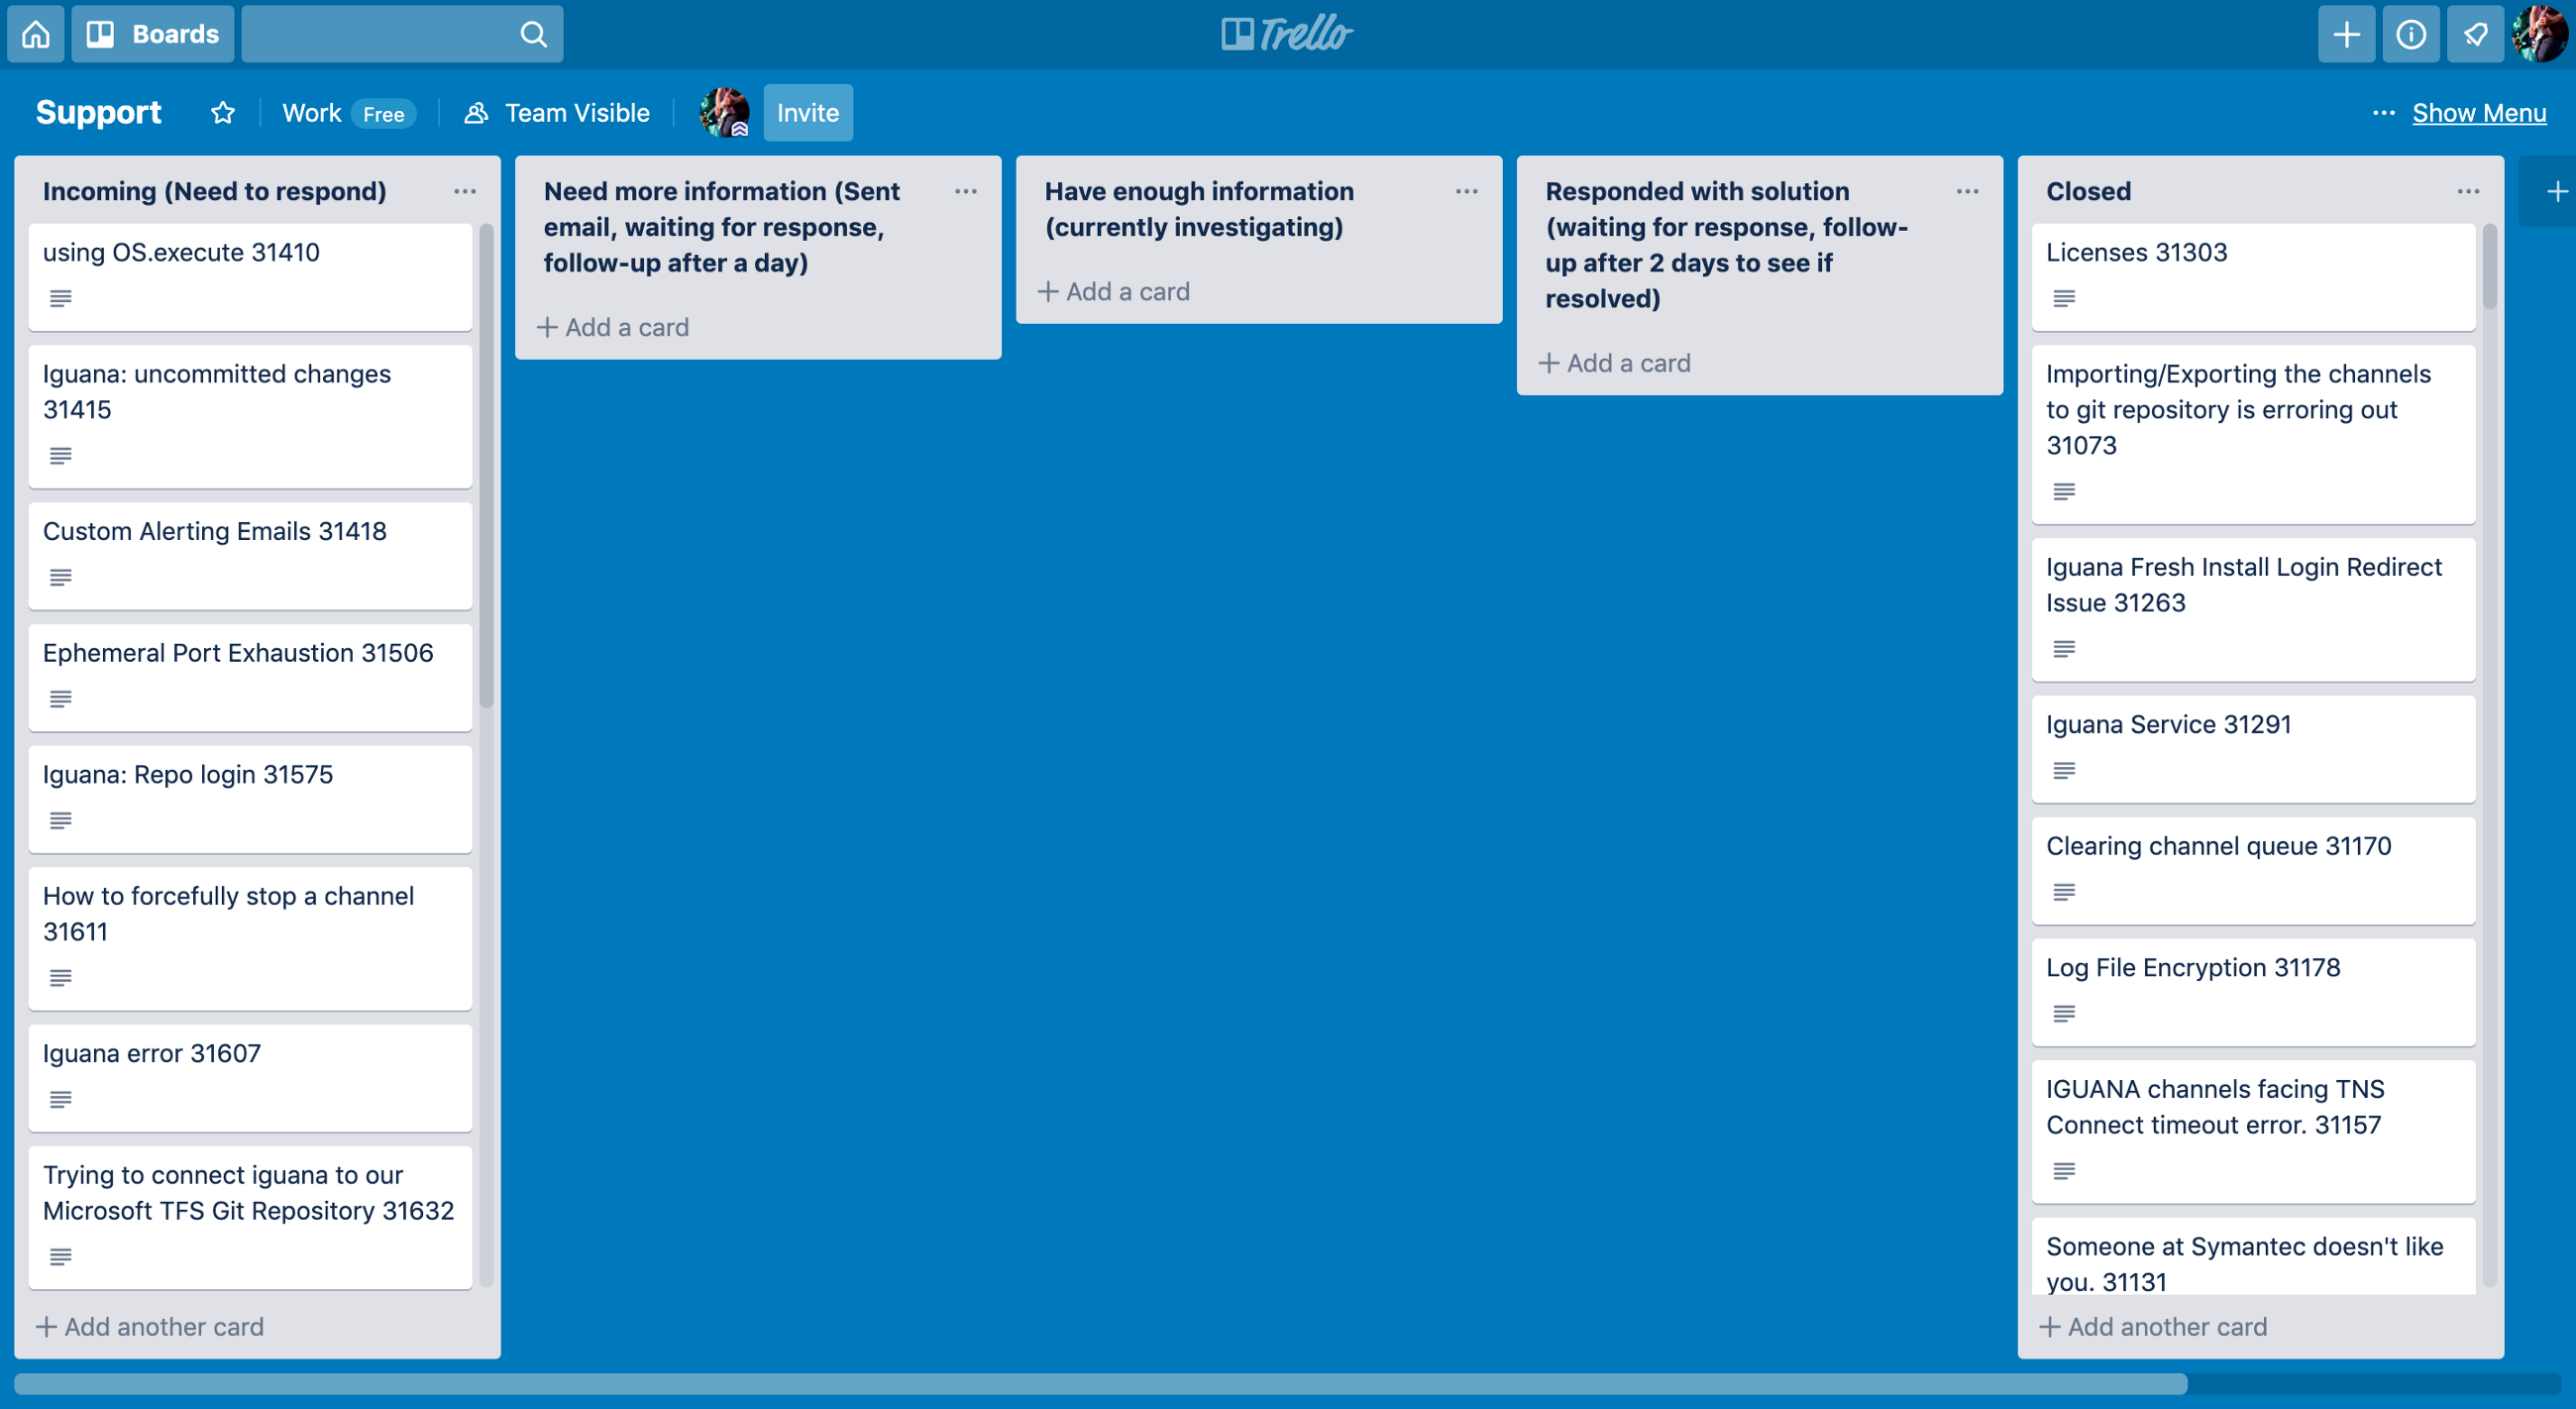 Support workflow on Trello board